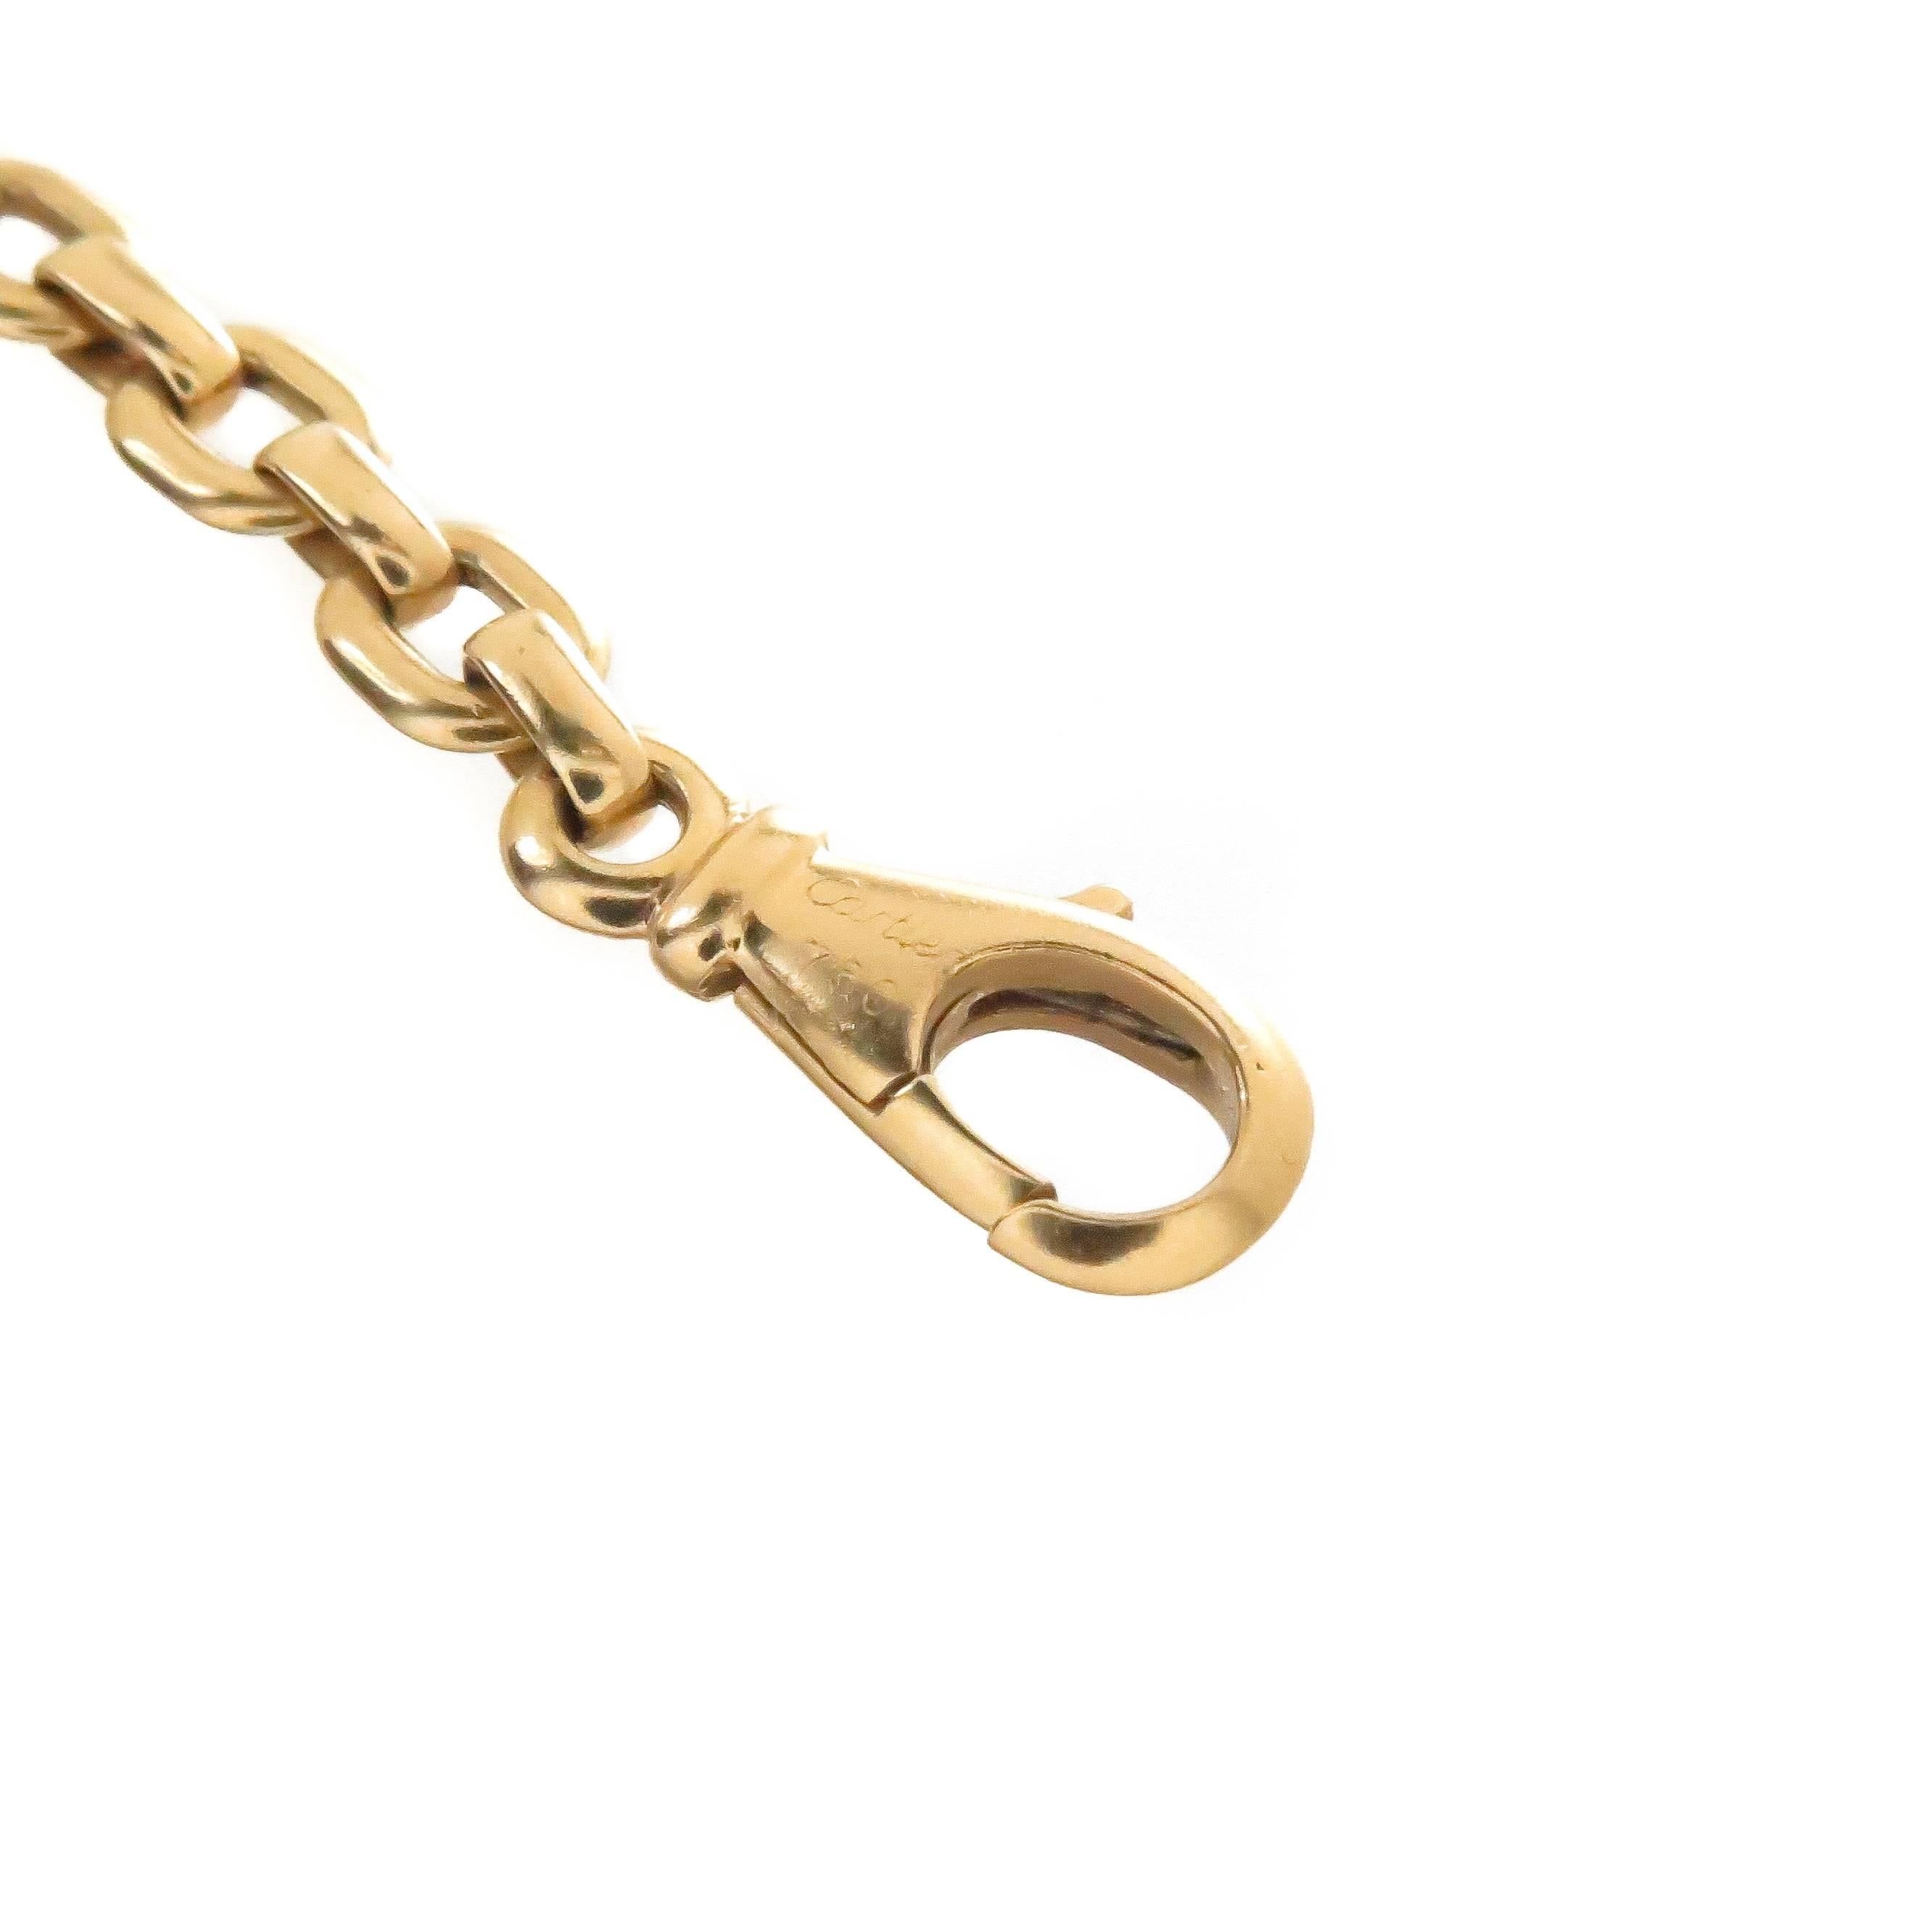 Circa 2000 Cartier 18K yellow Gold Link Bracelet, measuring 8 1/4 inches in length 3/16 inch wide and weighs 15.7 Grams. can be worn by itself or have Cartier charms attached to it. 